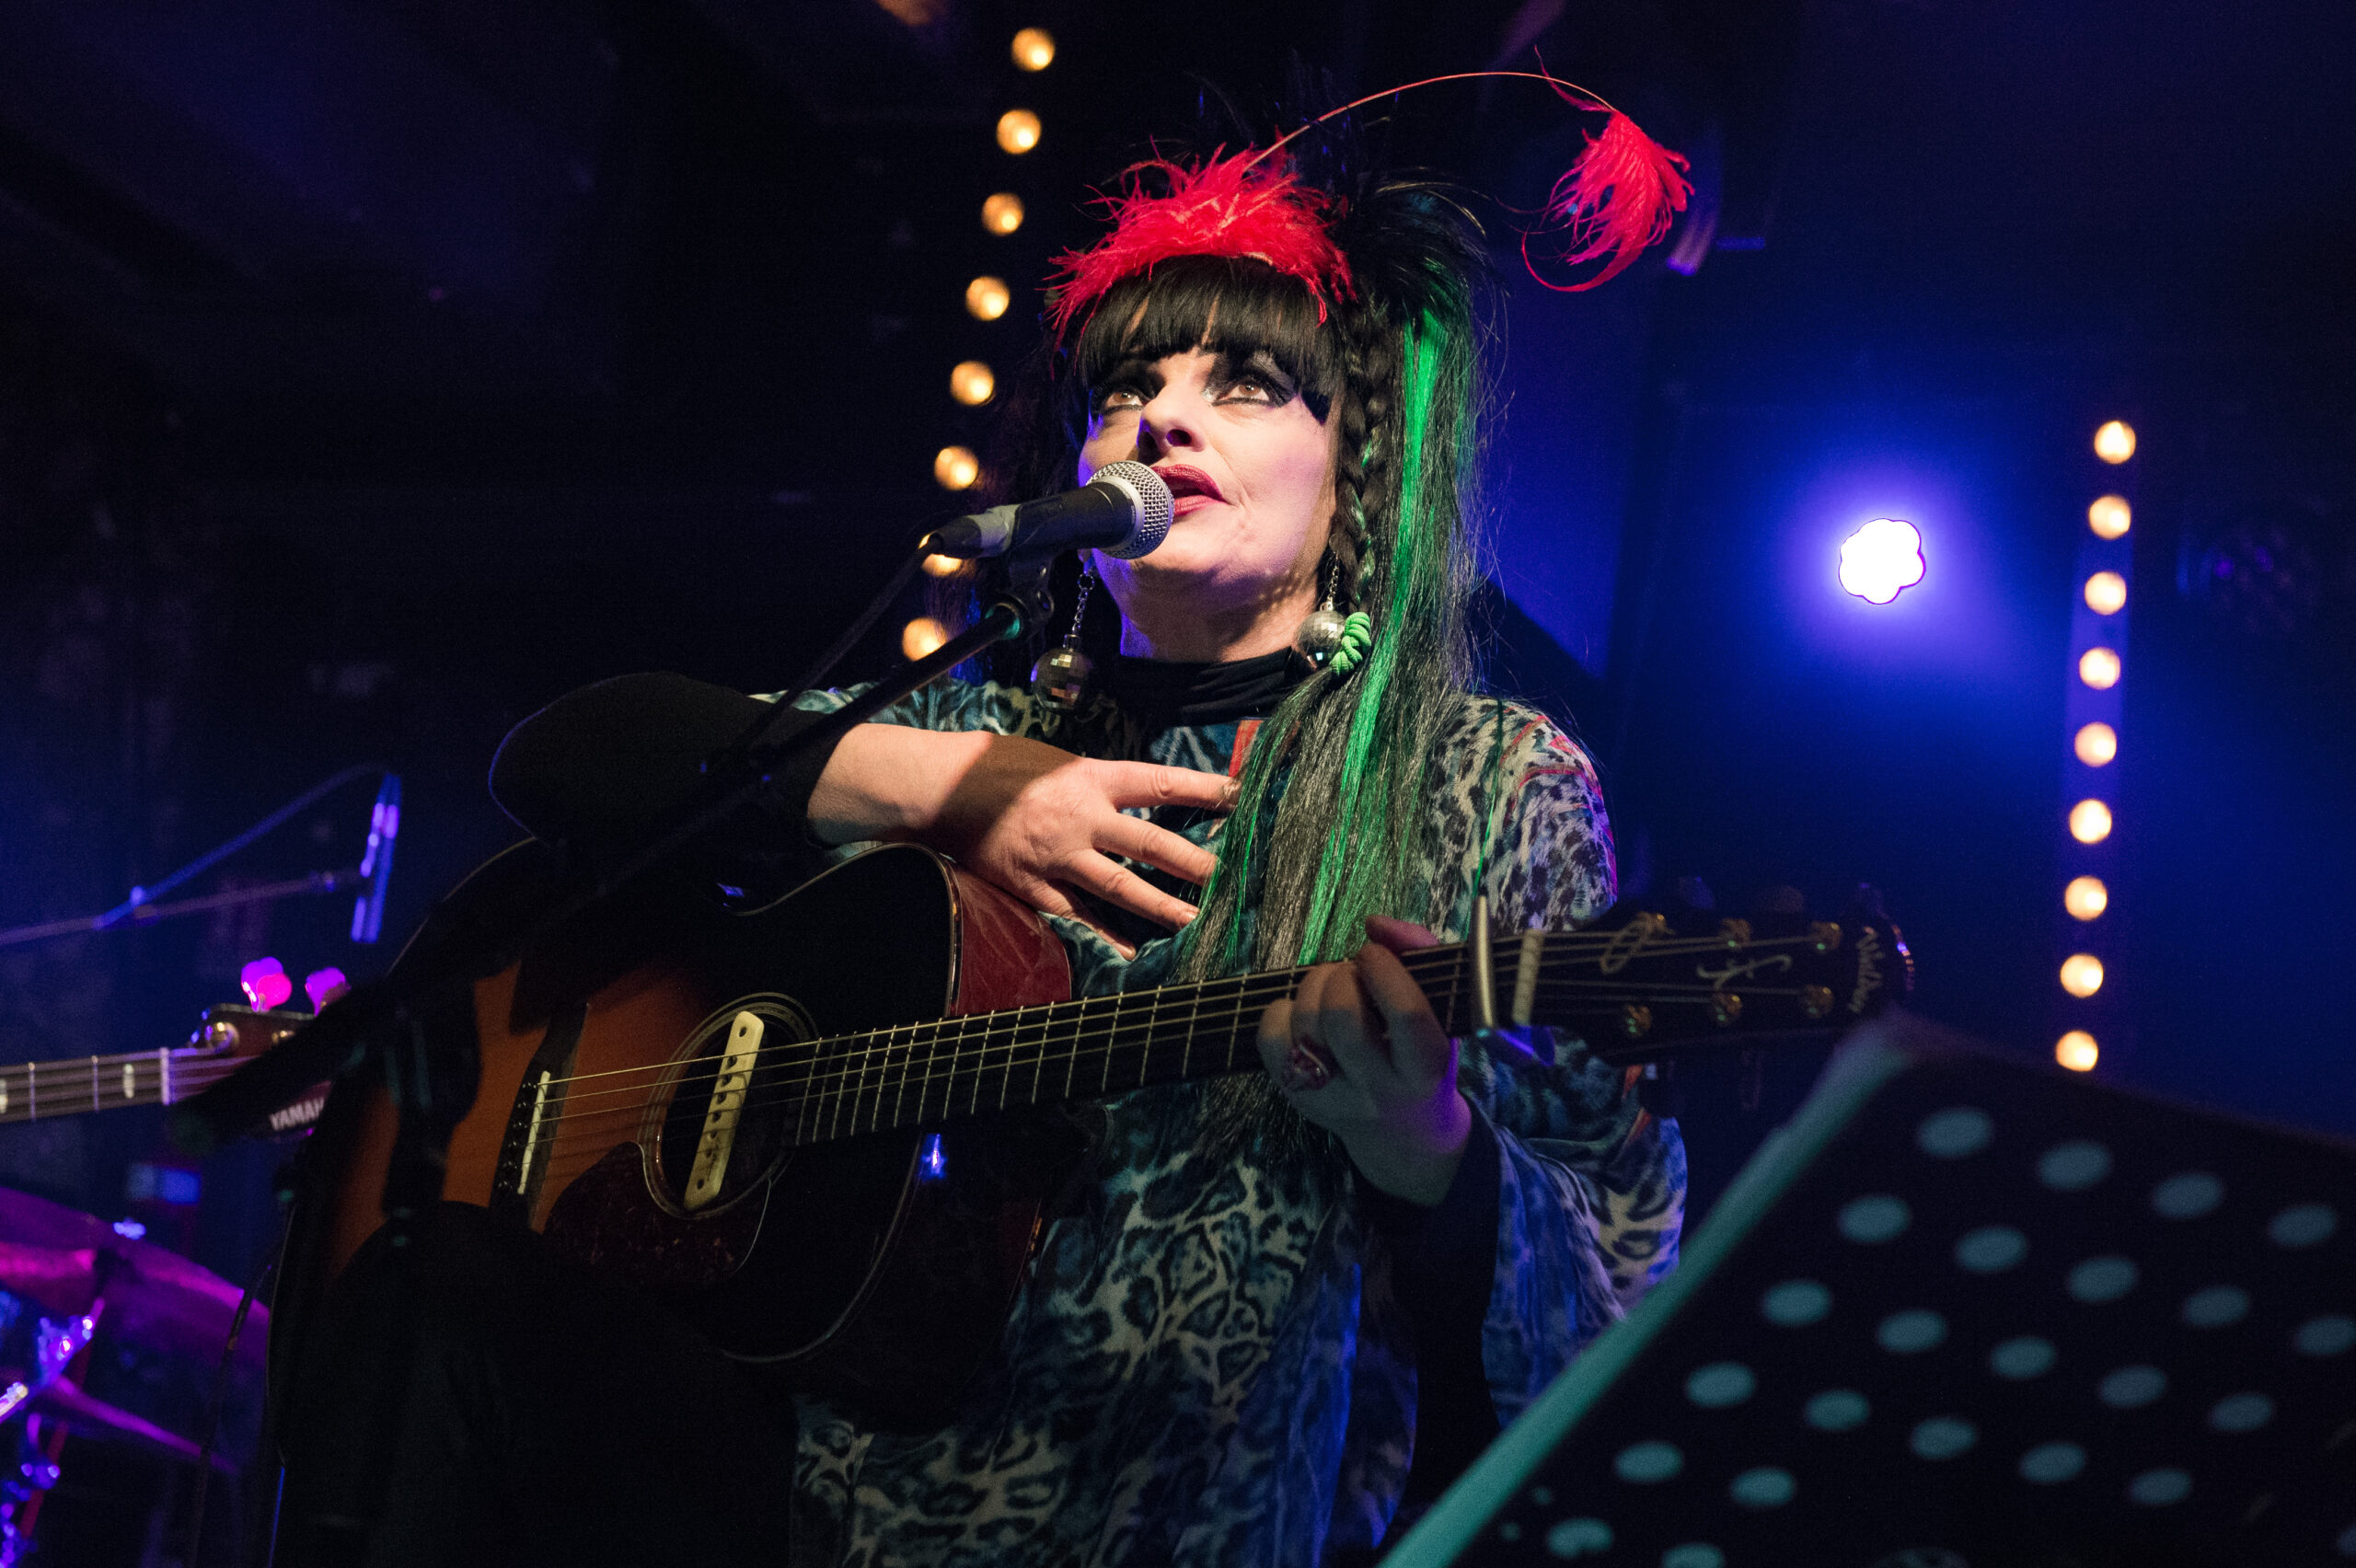 5 Albums I Can’t Live Without: Nina Hagen